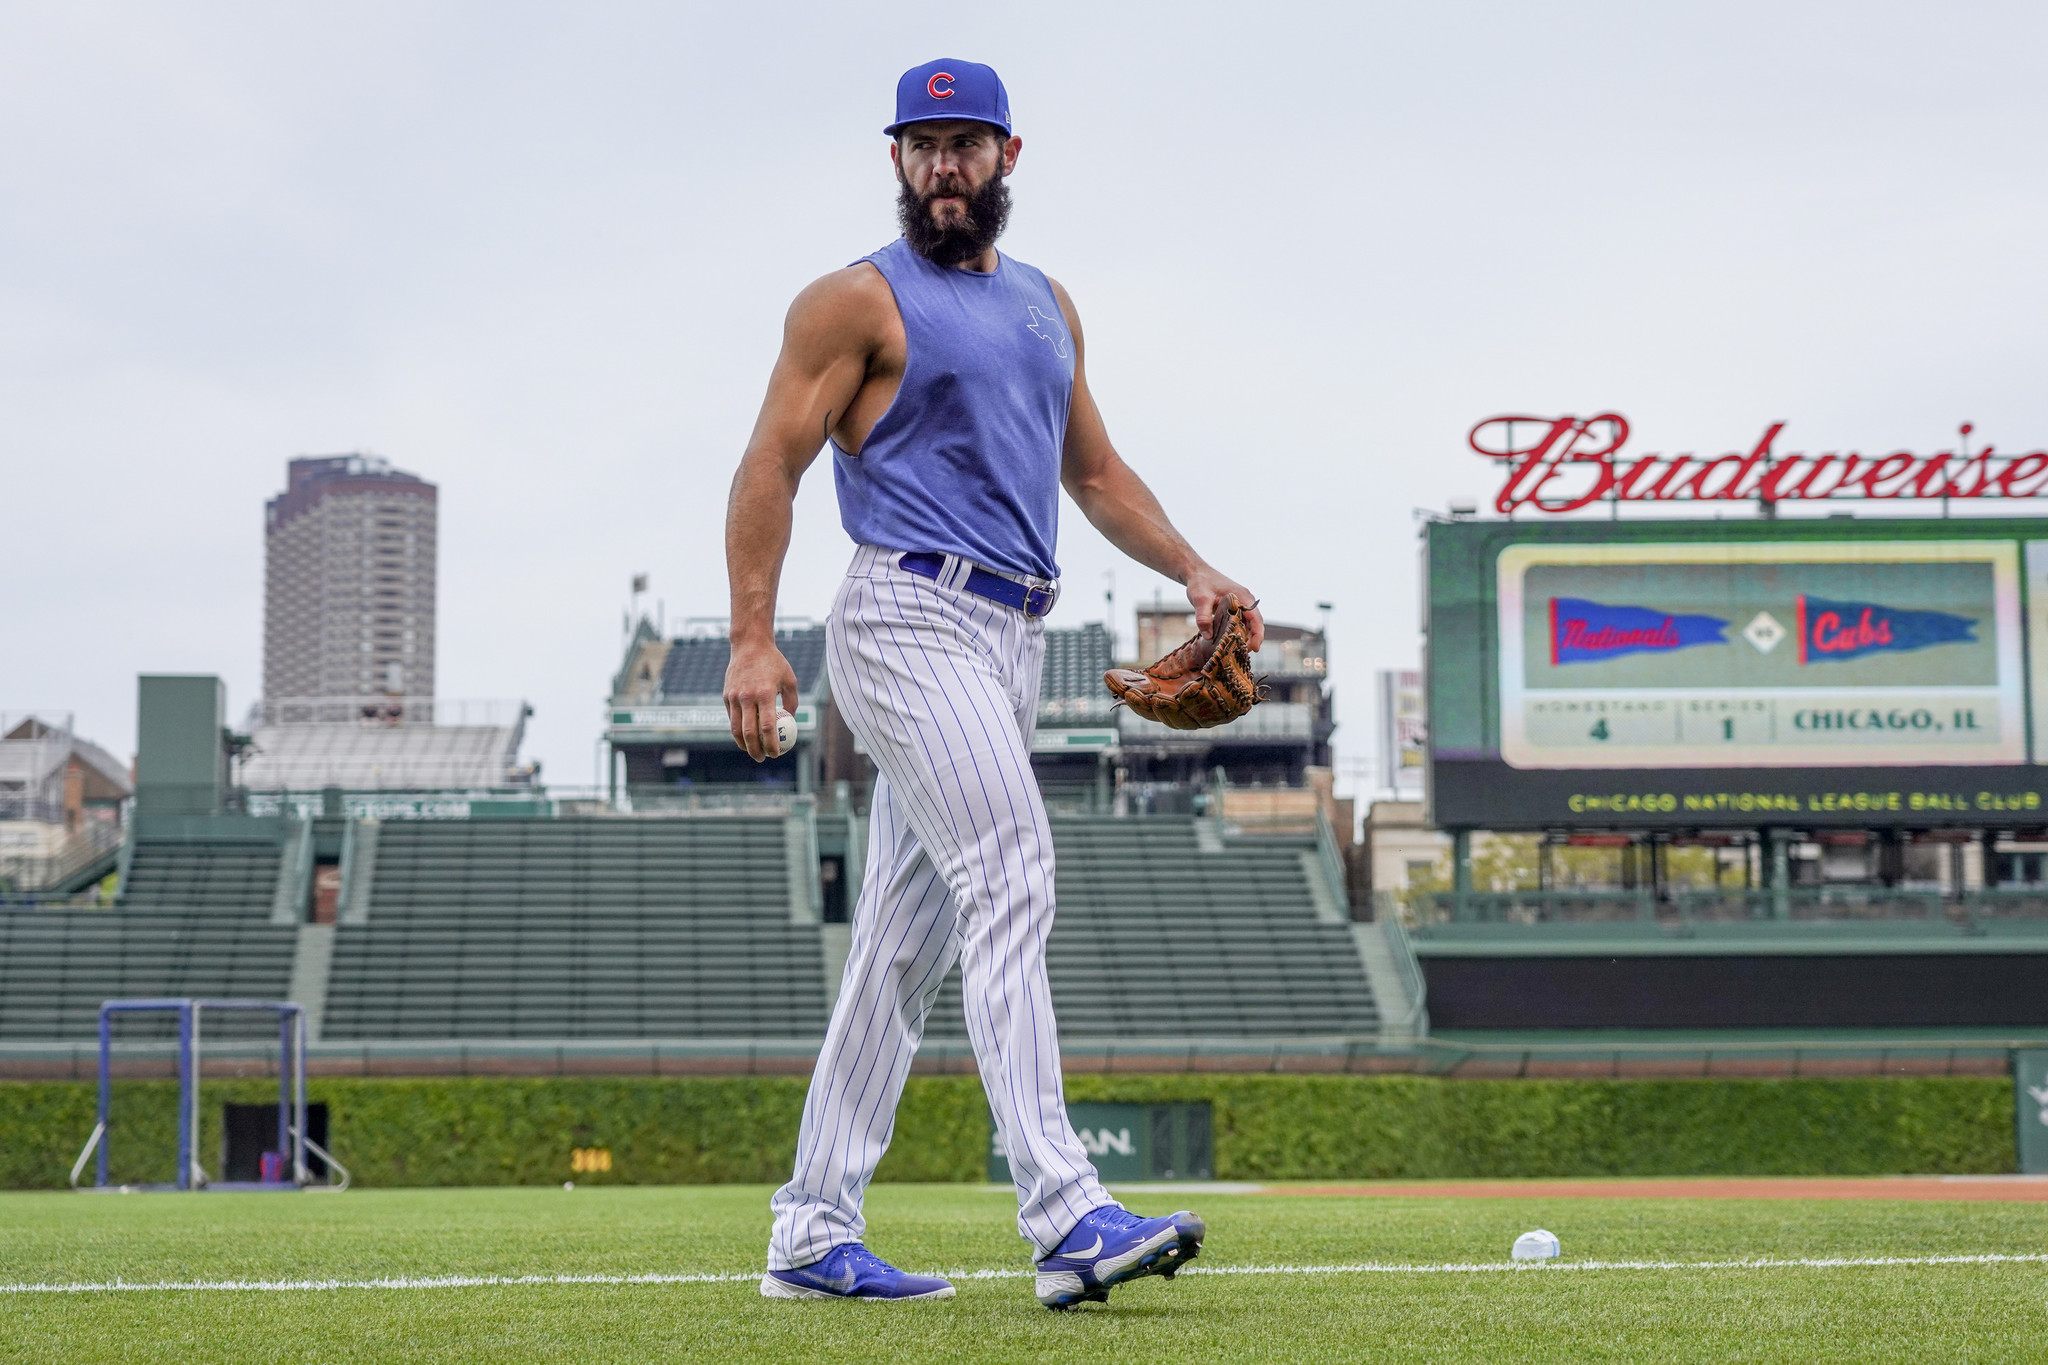 Chicago Cubs turn 'W' into lifestyle clothing brand